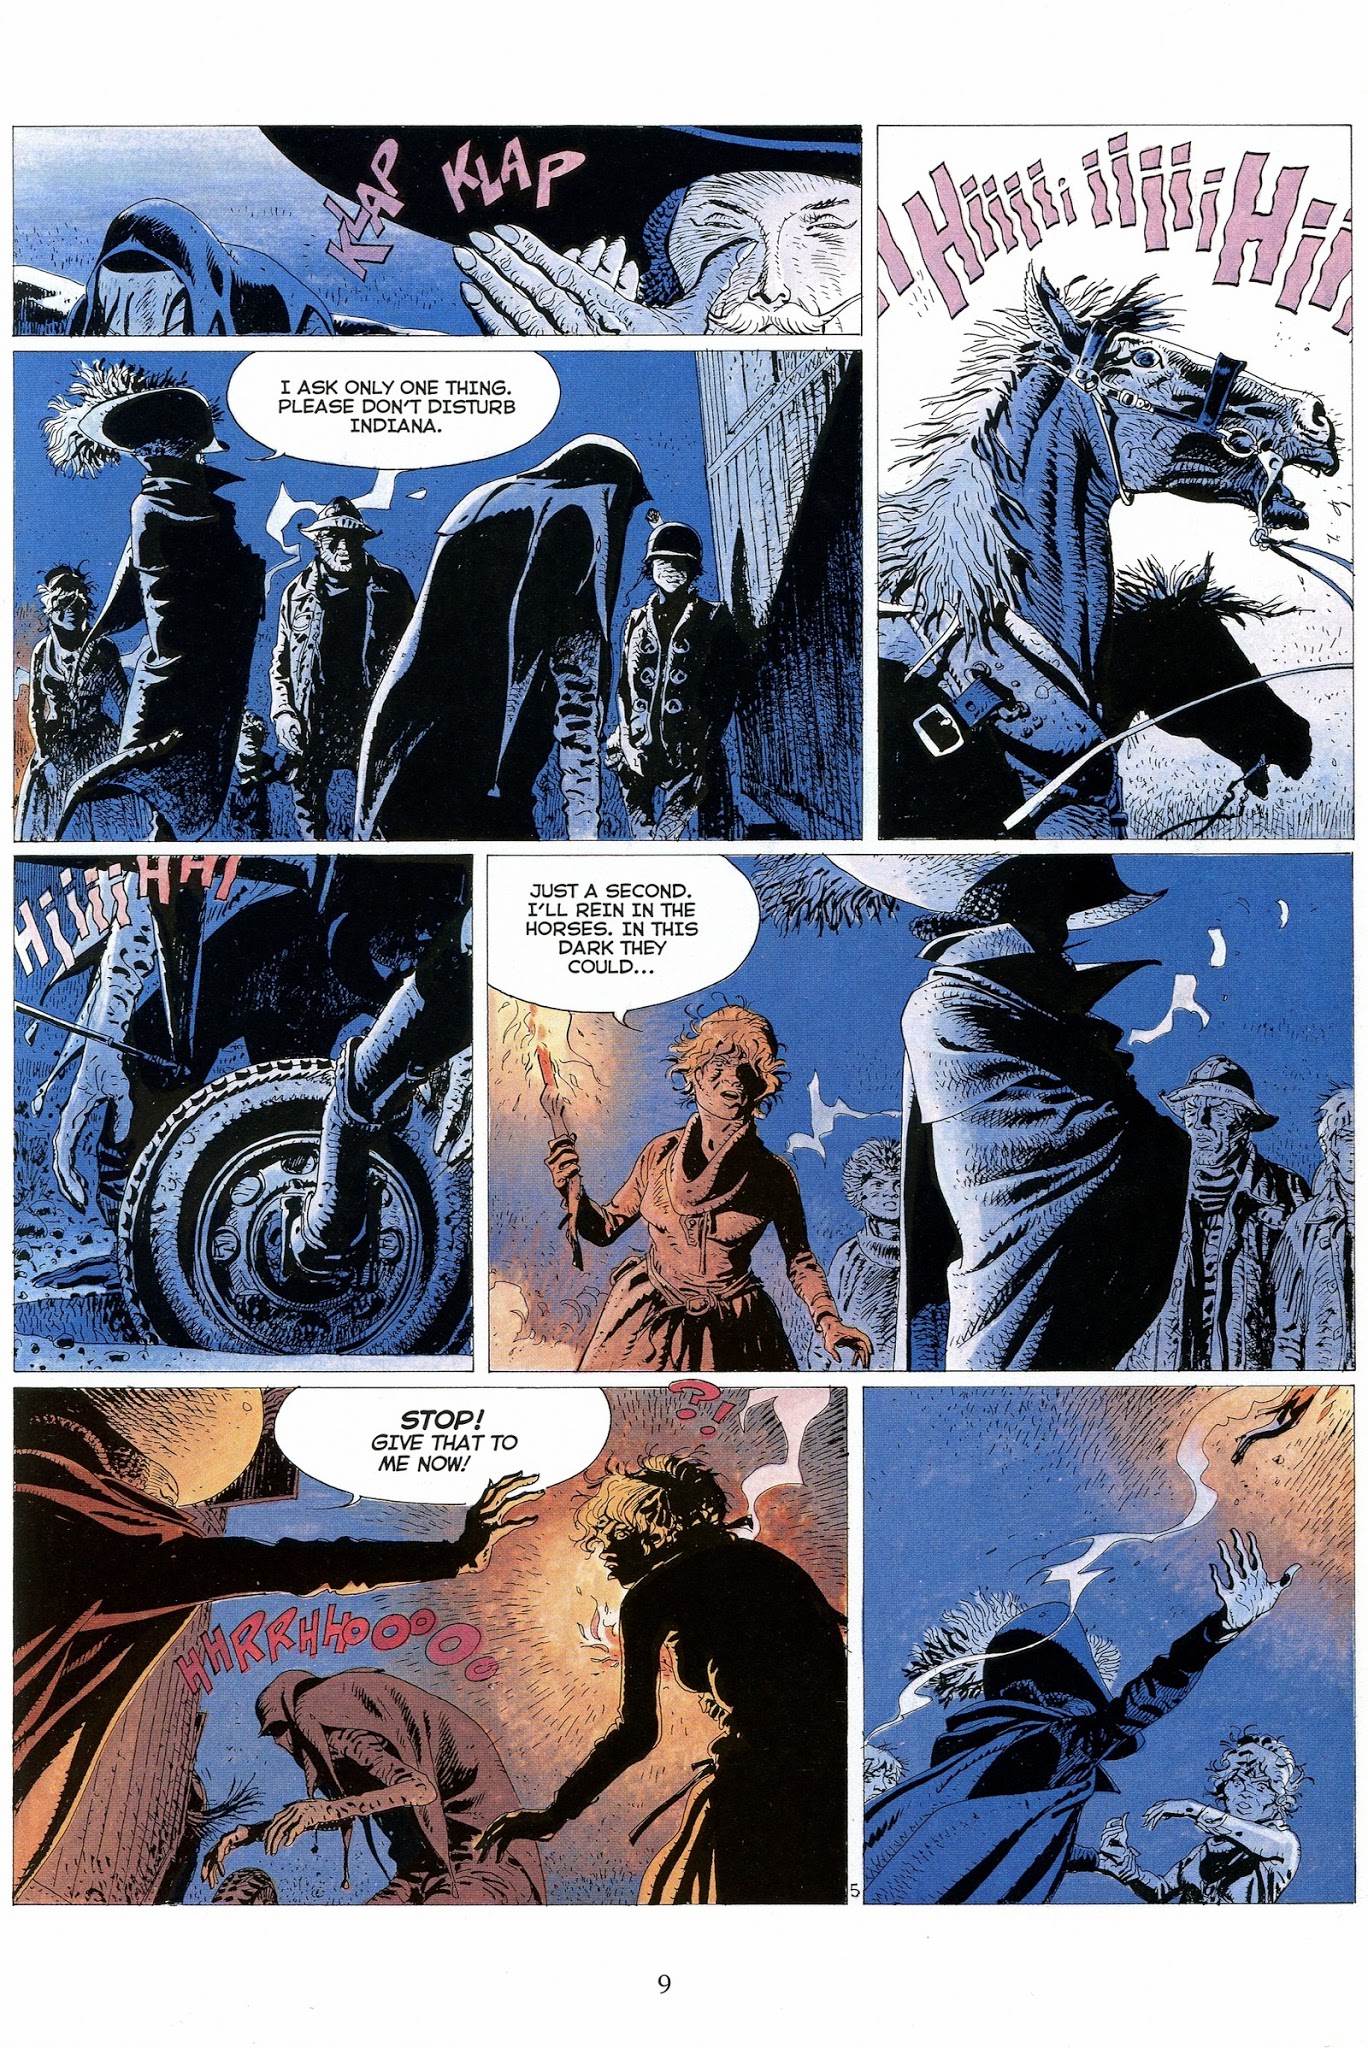 Read online Jeremiah by Hermann comic -  Issue # TPB 2 - 10